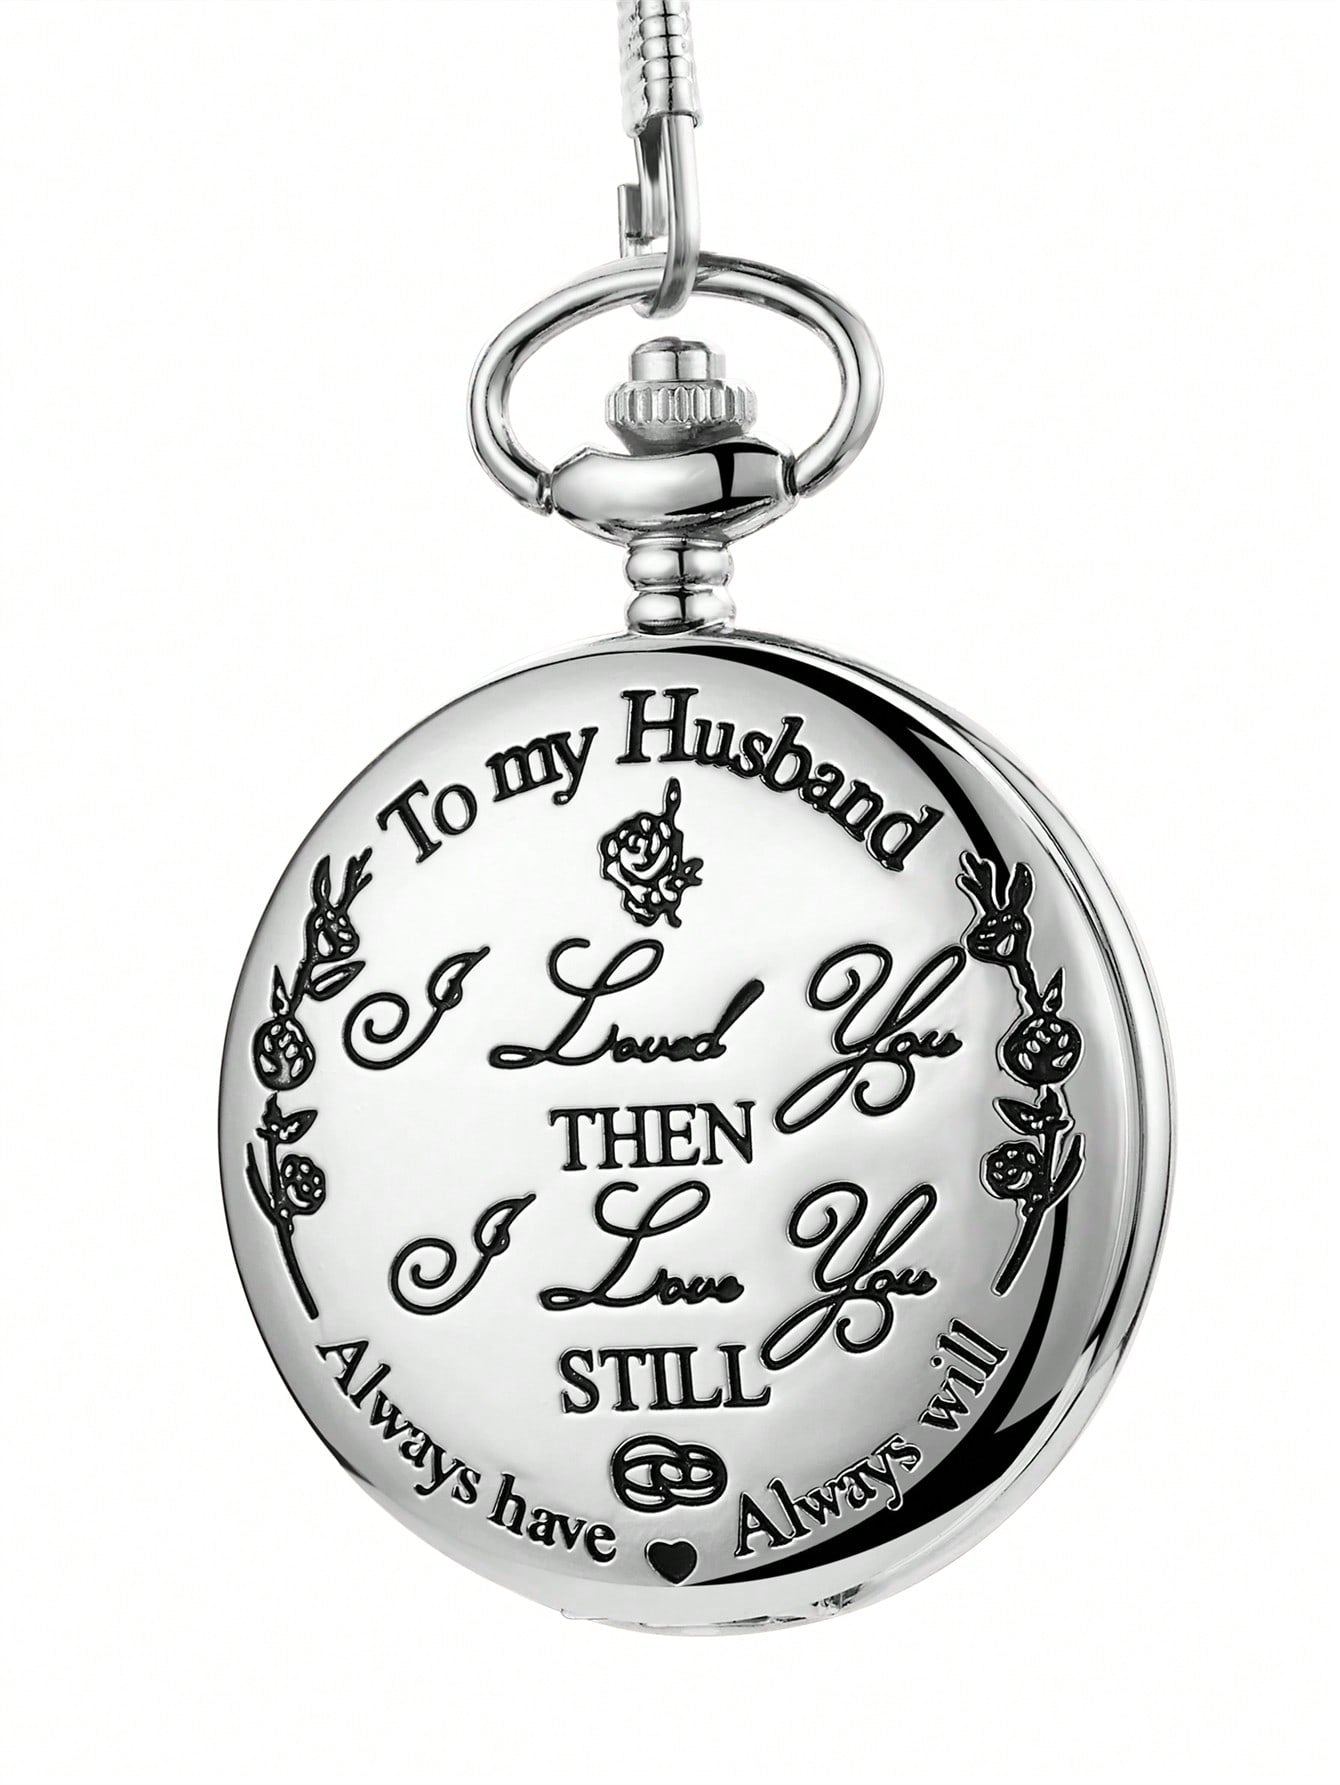 A Gift For Husband - Retro Style Pocket Watch With Alloy Chain, Round Shape Men's Birthday Gift